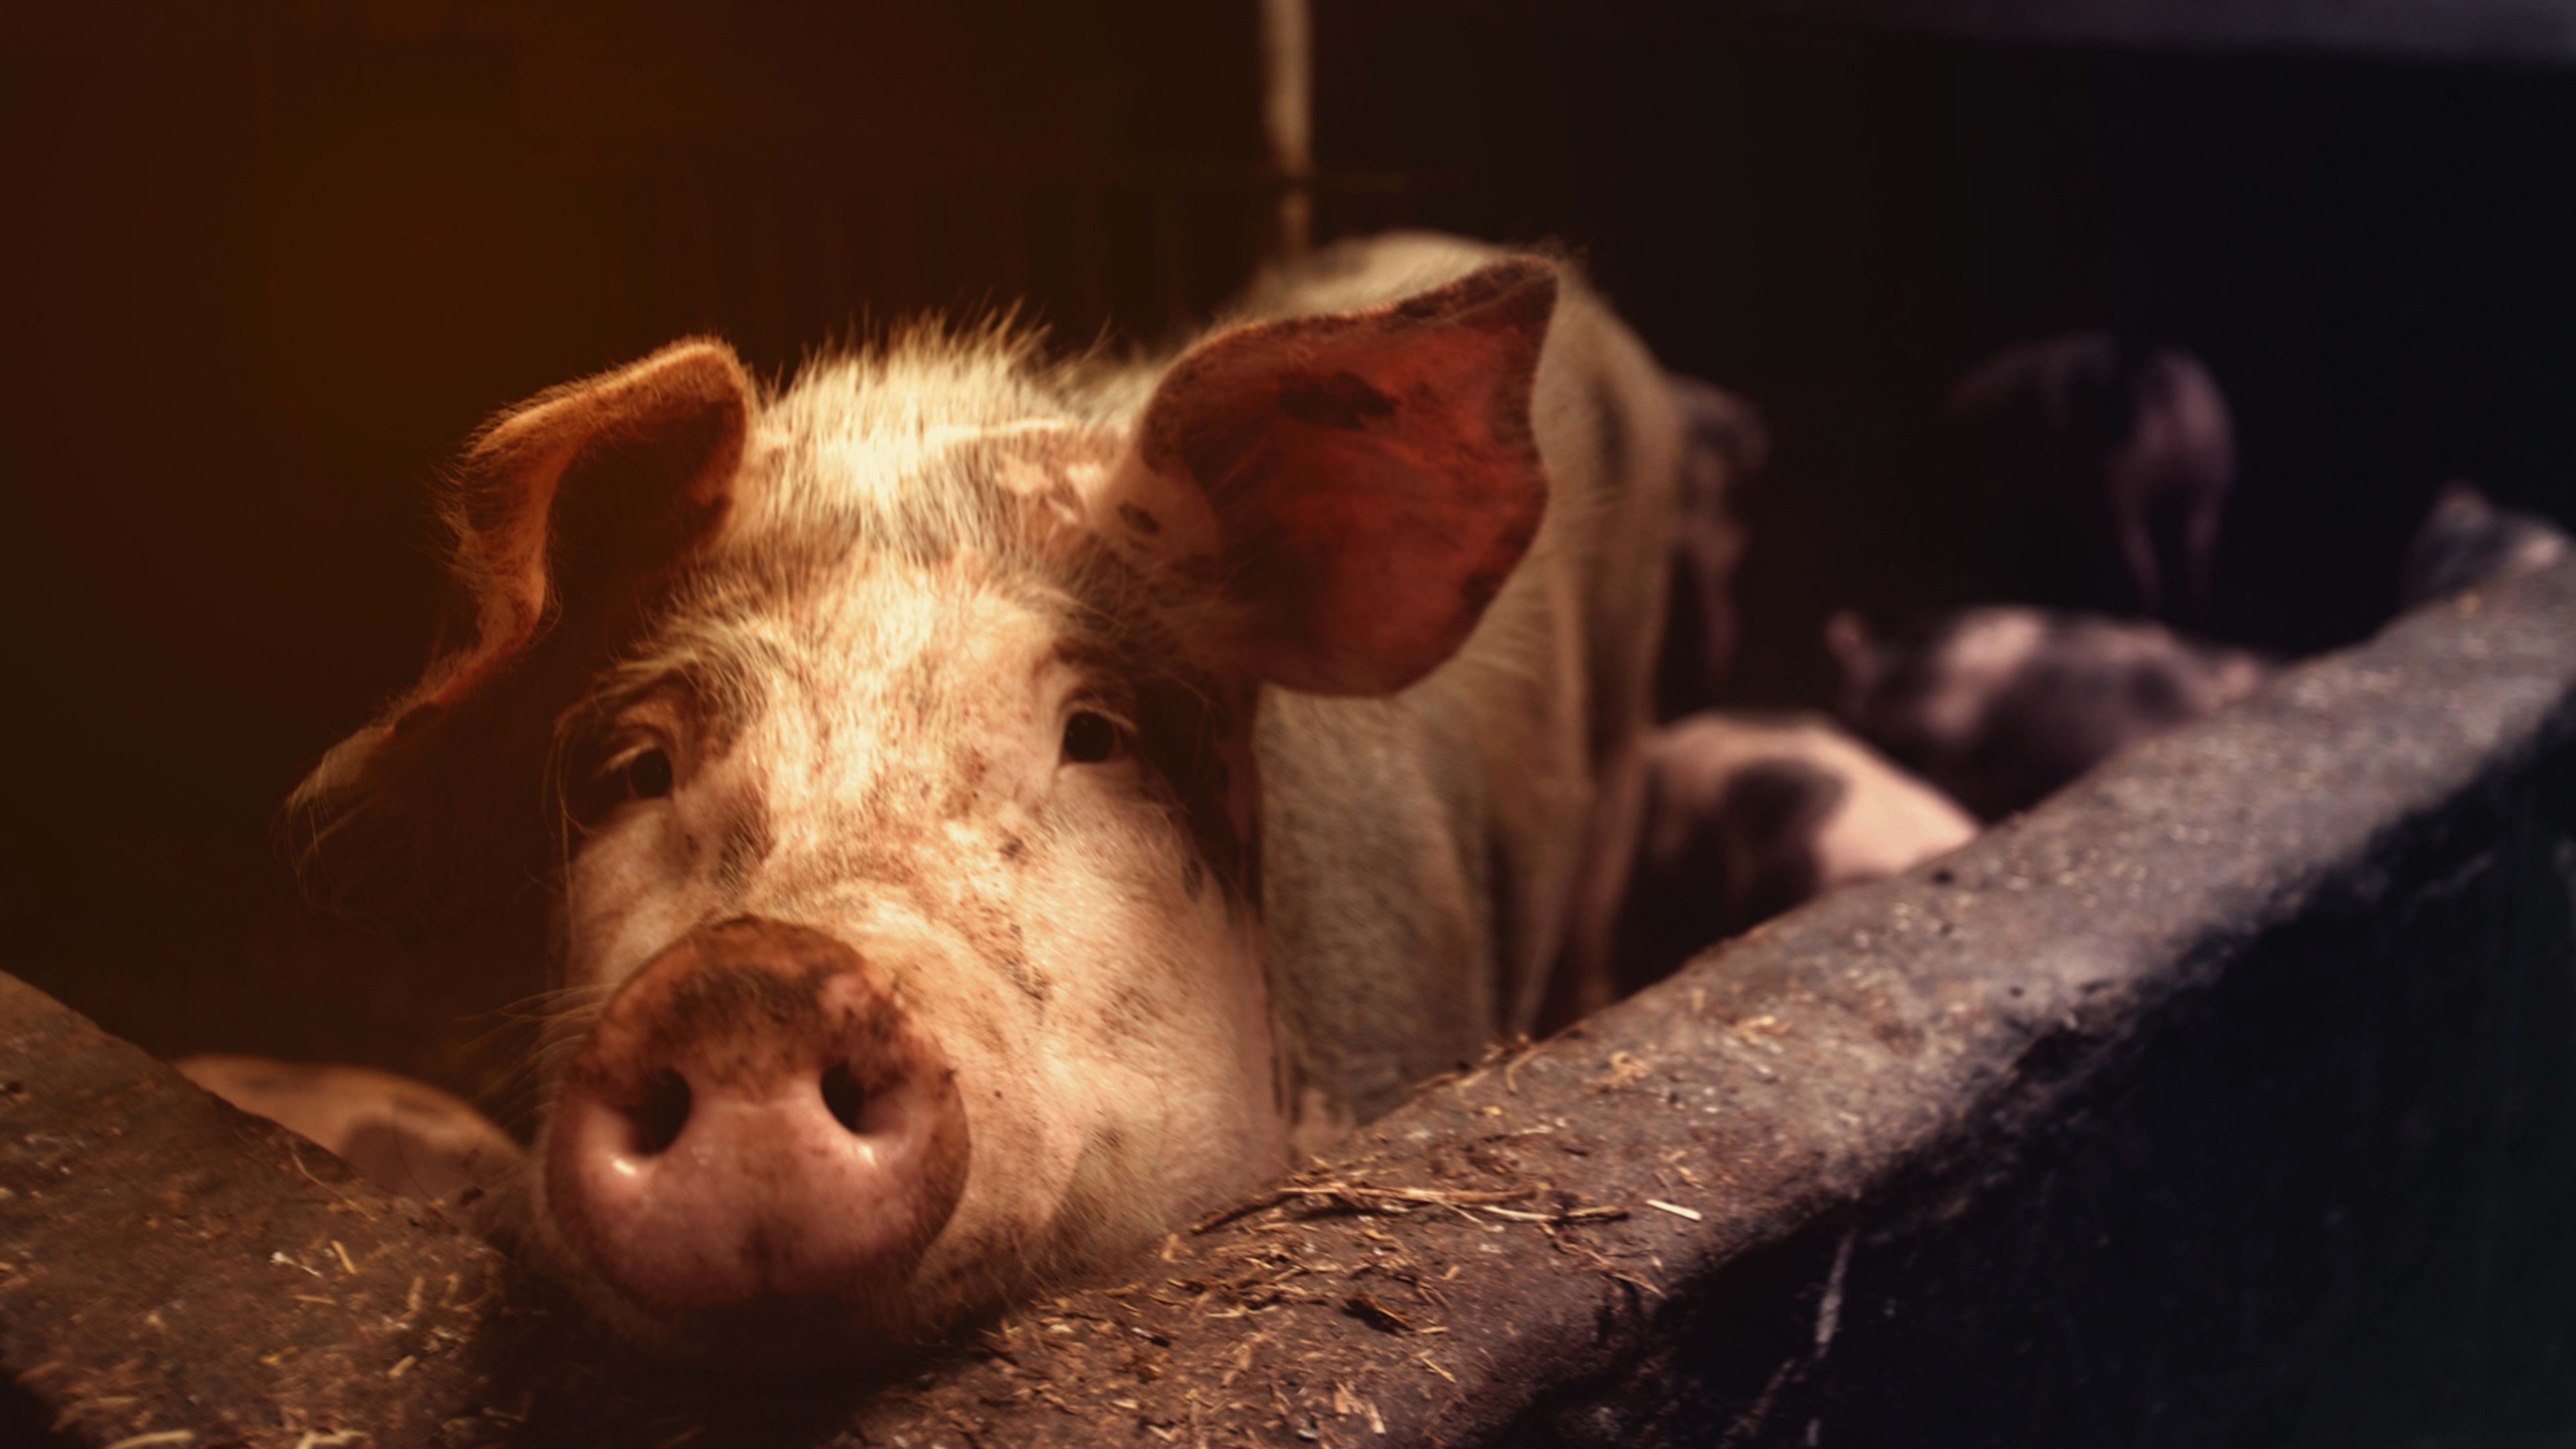 USDA lets pig farms self-regulate: What could possibly go wrong?